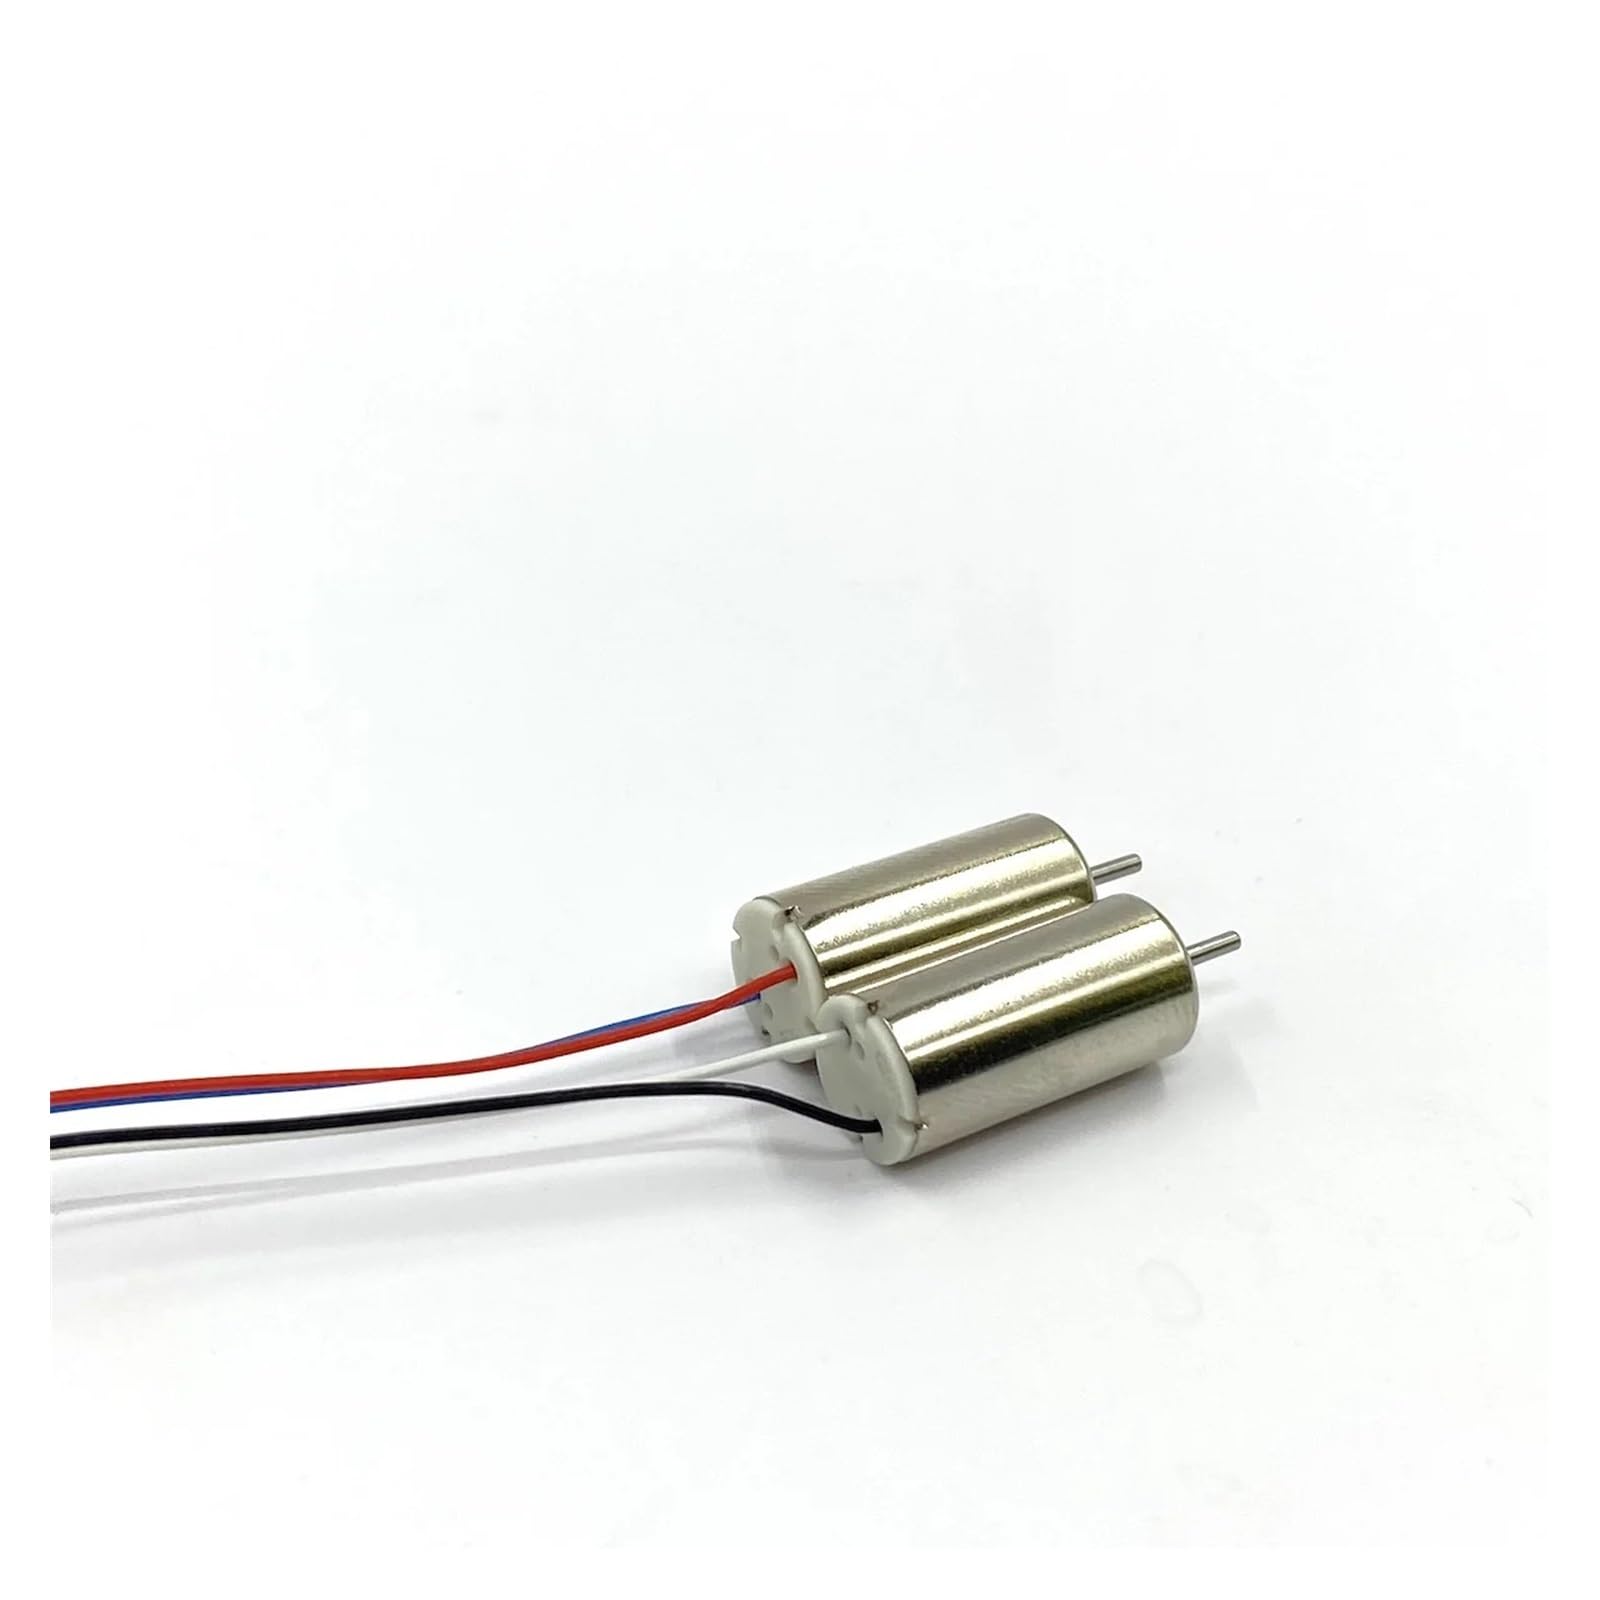 2pcs/lot 816 8mm*16mm Coreless electronic starter DC 3.7V 61000RPM High Speed For RC Drone Quadcopter Engine BIANMTSW von BIANMTSW